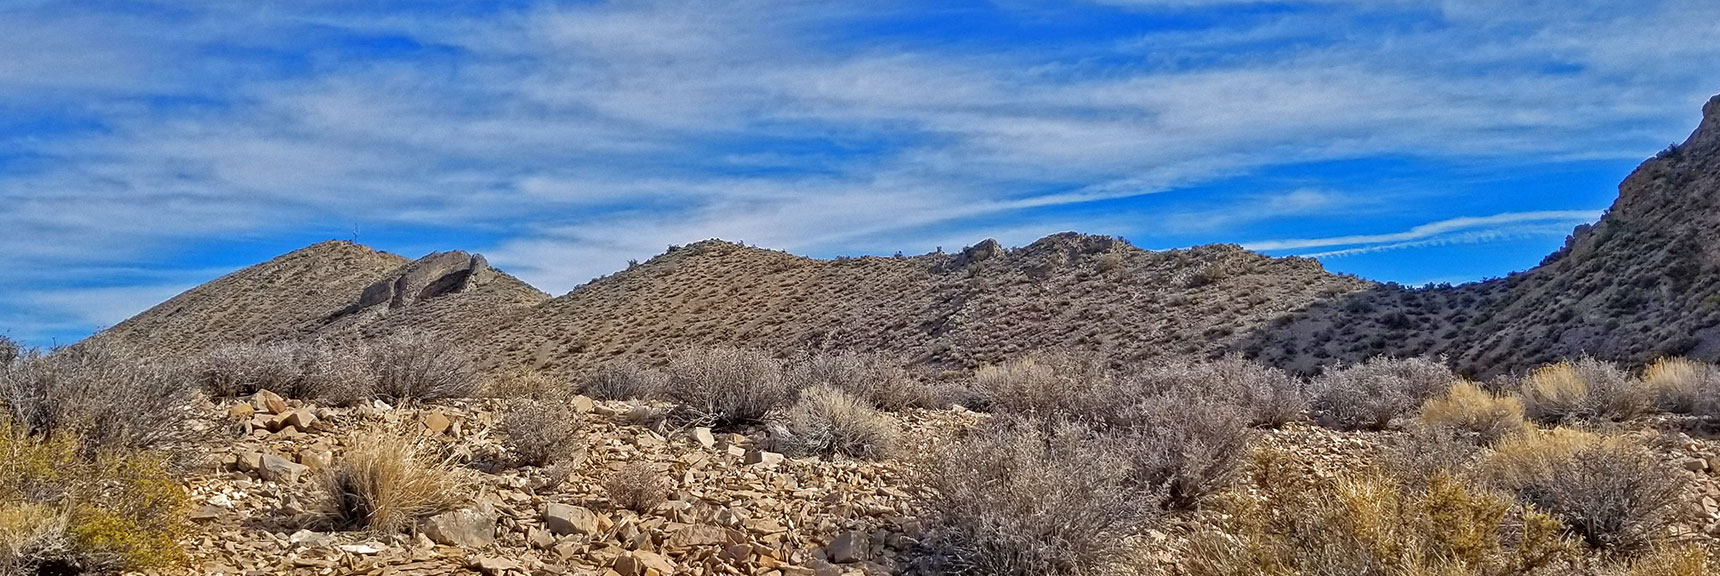 View Back Across the Gass Peak Gauntlet. Route Corrections Needed Every 50-100ft. | Gass Peak Grand Crossing | Desert National Wildlife Refuge to Centennial Hills Las Vegas via Gass Peak Summit by Foot